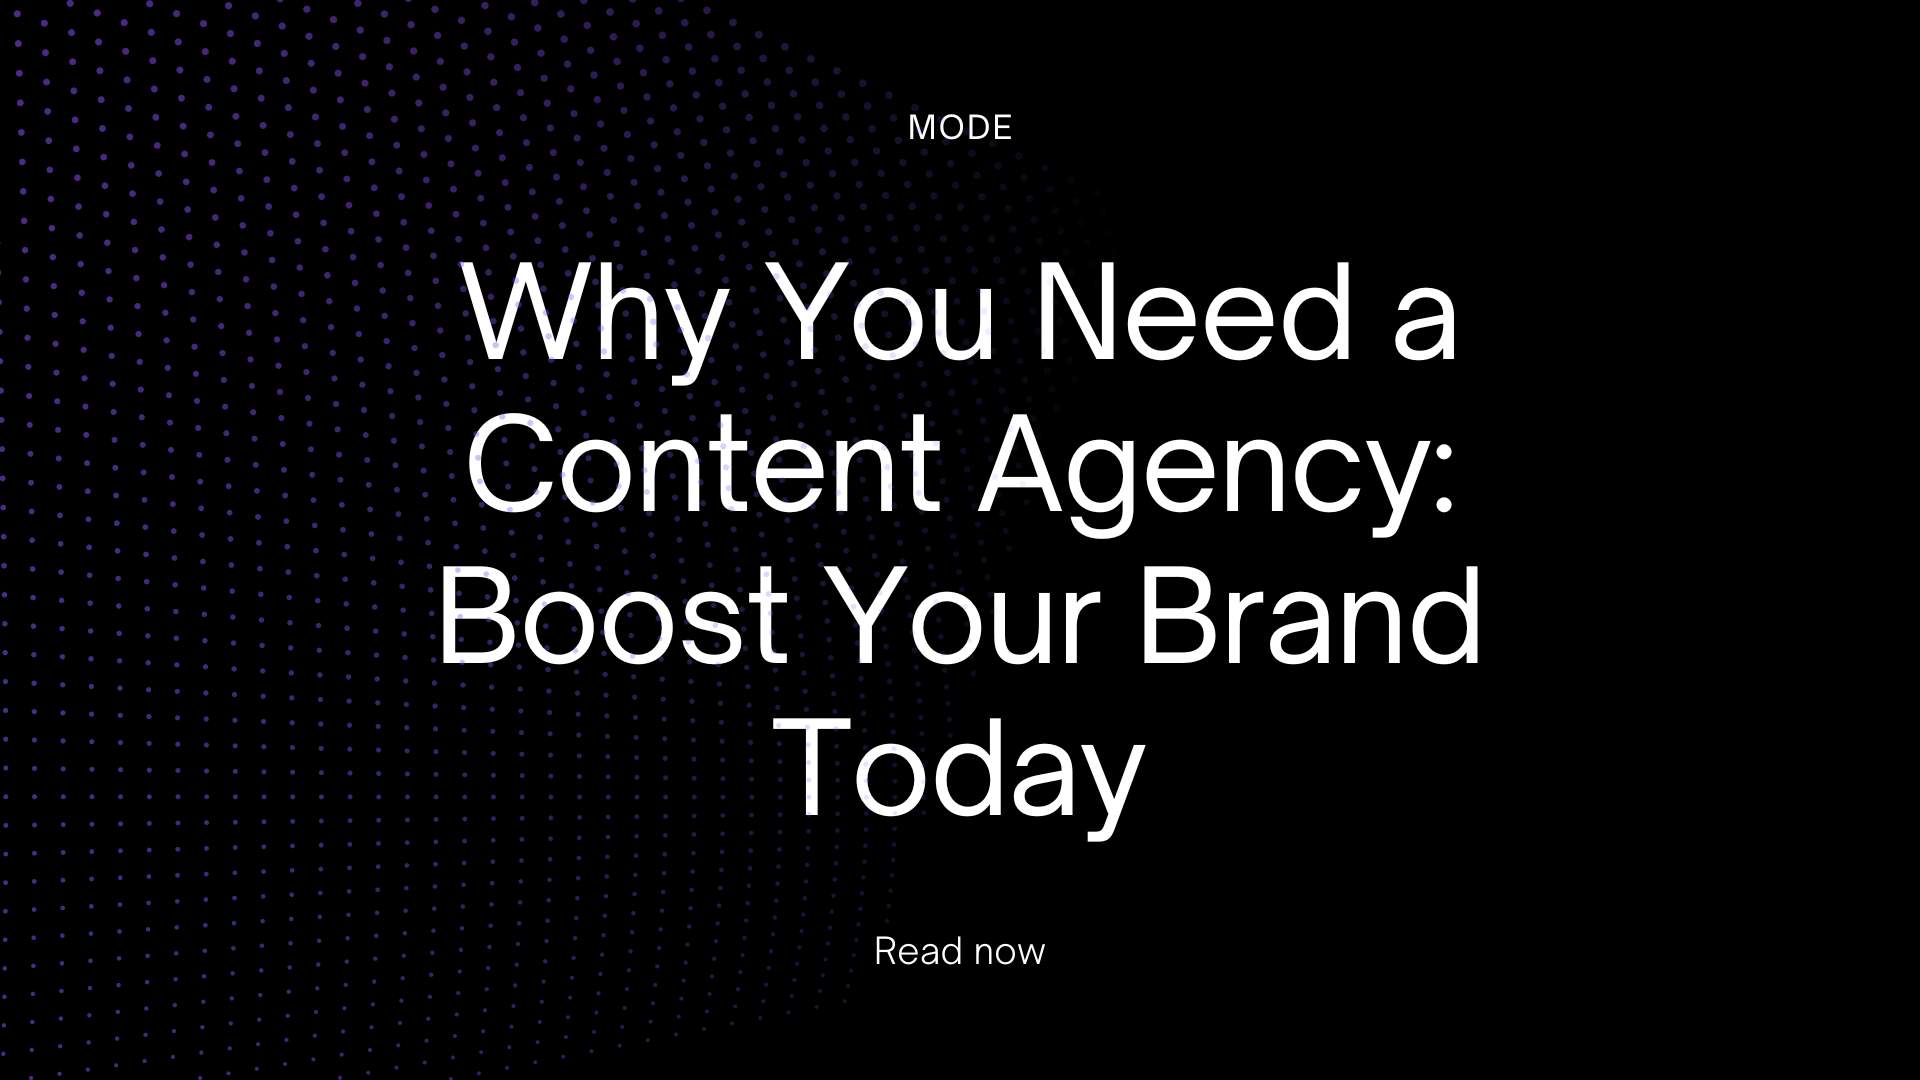 Why You Need a Content Agency: Boost Your Brand Today